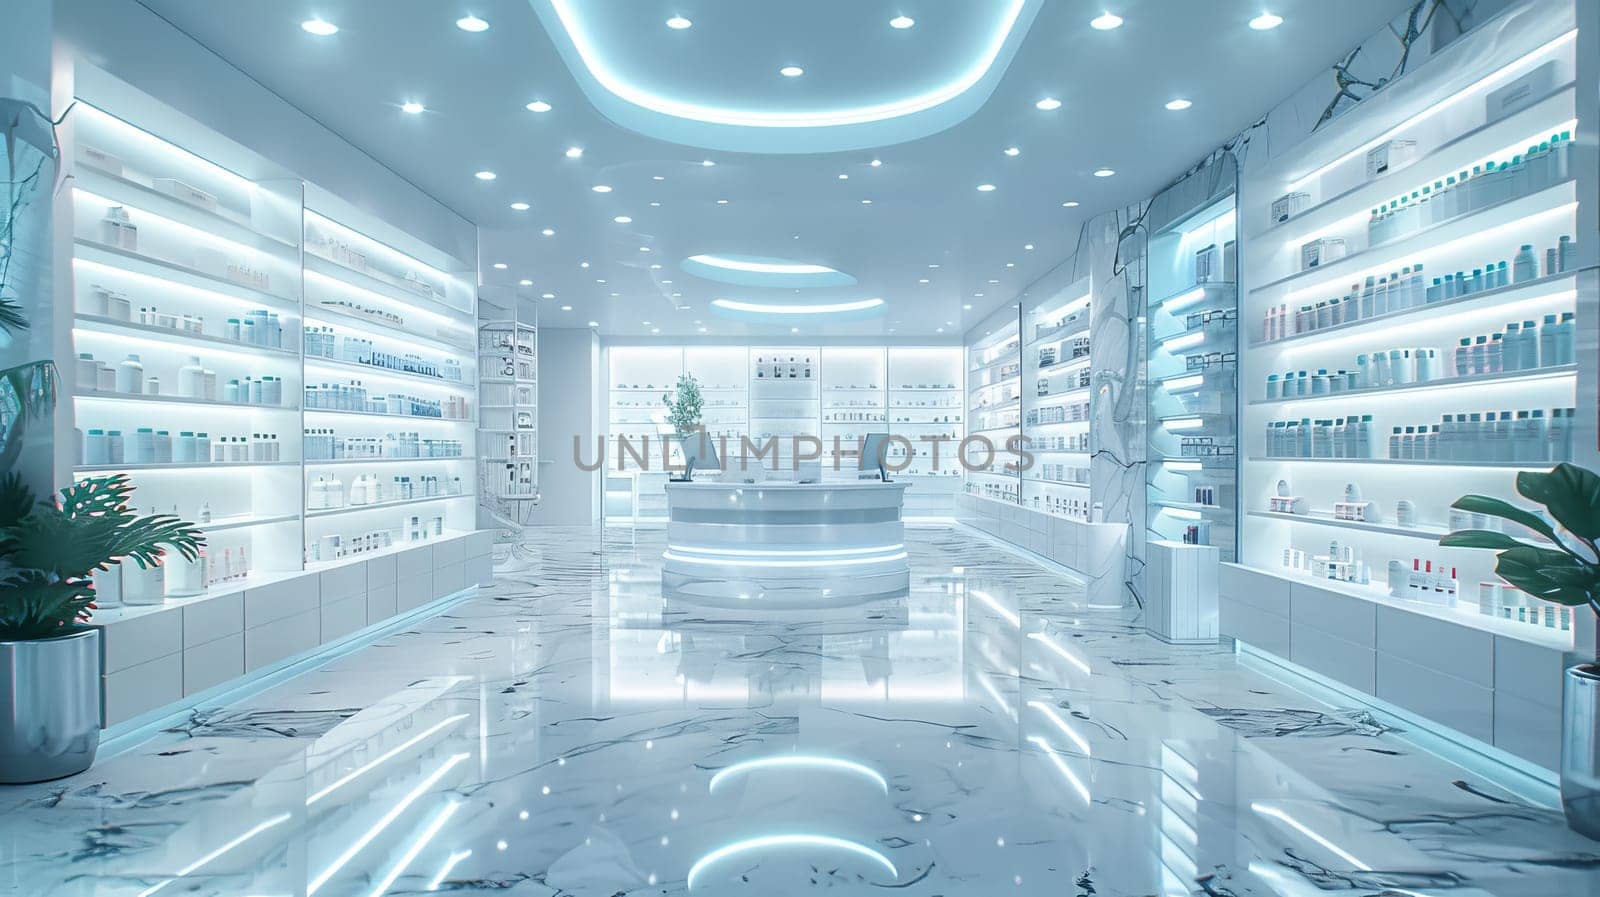 A large store with a bright blue ceiling and white walls. The store is filled with shelves of various products, including bottles and potted plants. The atmosphere is bright and inviting